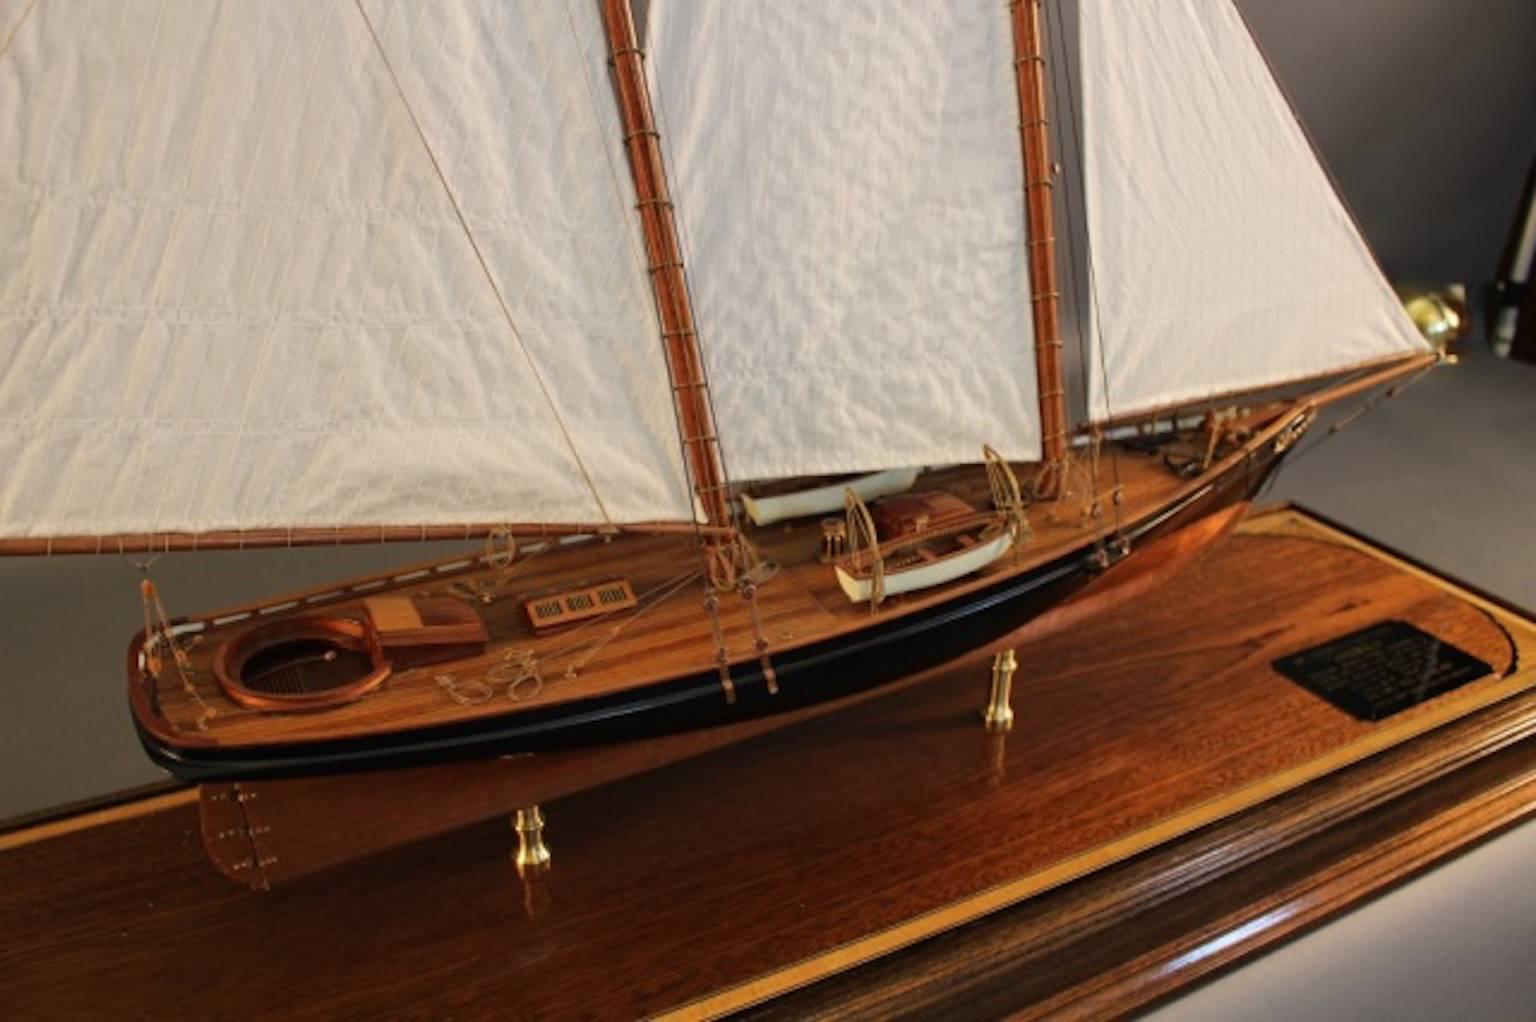 Fine, scale model of the schooner yacht “America”, the first winner of the America’s Cup. Copper sheathed below the waterline. Mahogany deck, linen sails. Mounted into a brass display case.
Model dimensions: 35" L x 6" W x 29"